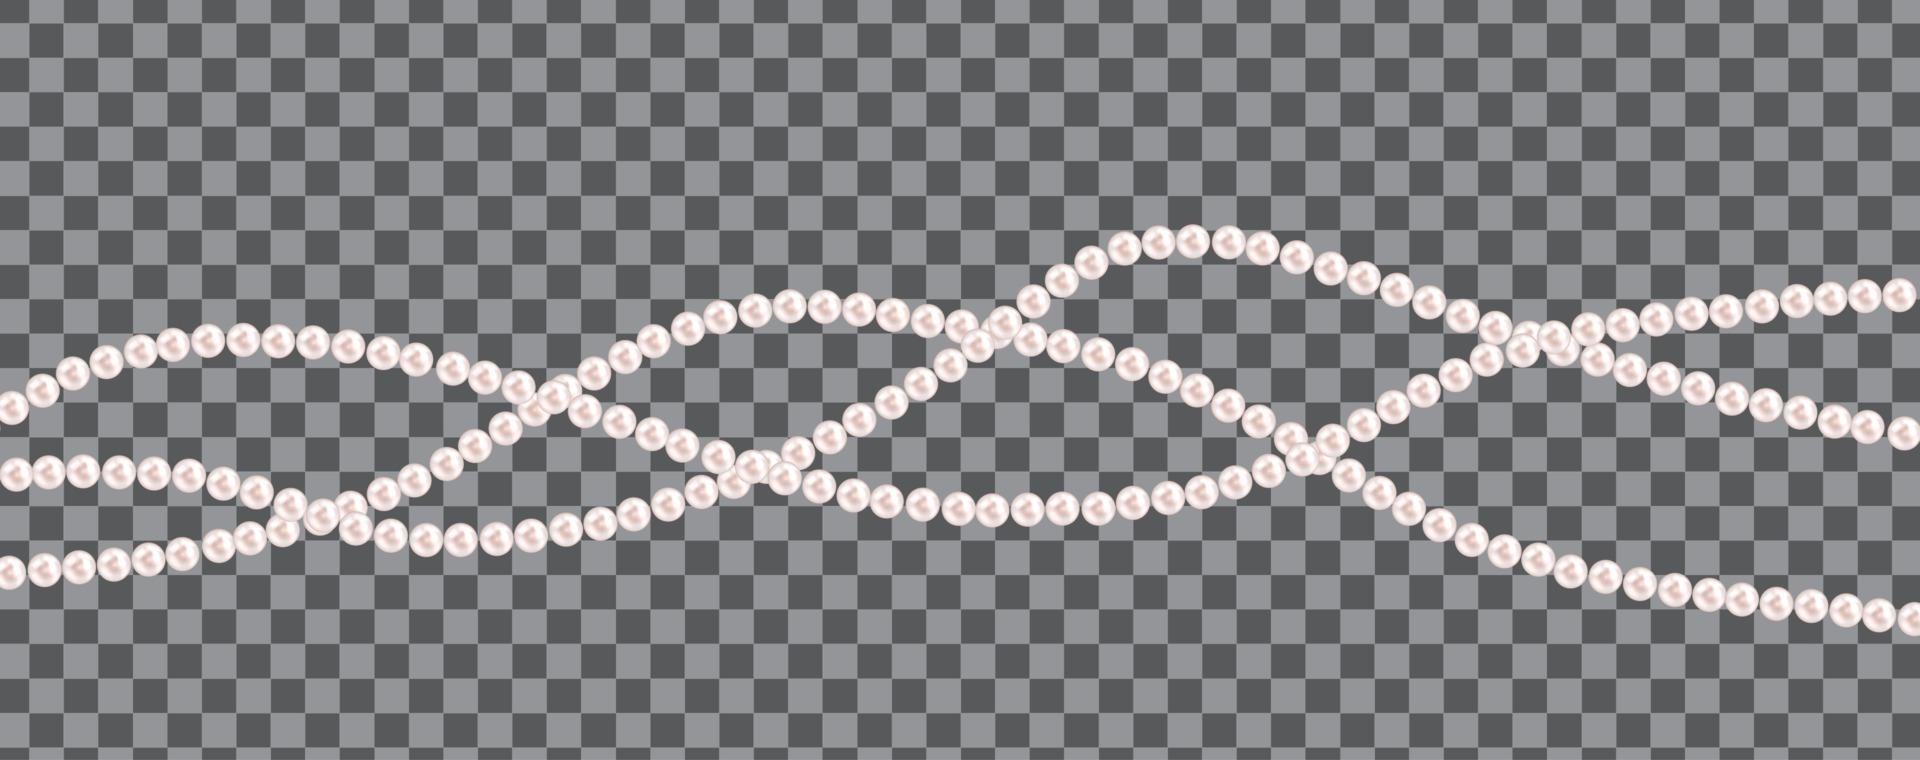 Abstract background with natural pearl garlands of beads. Vector illustration